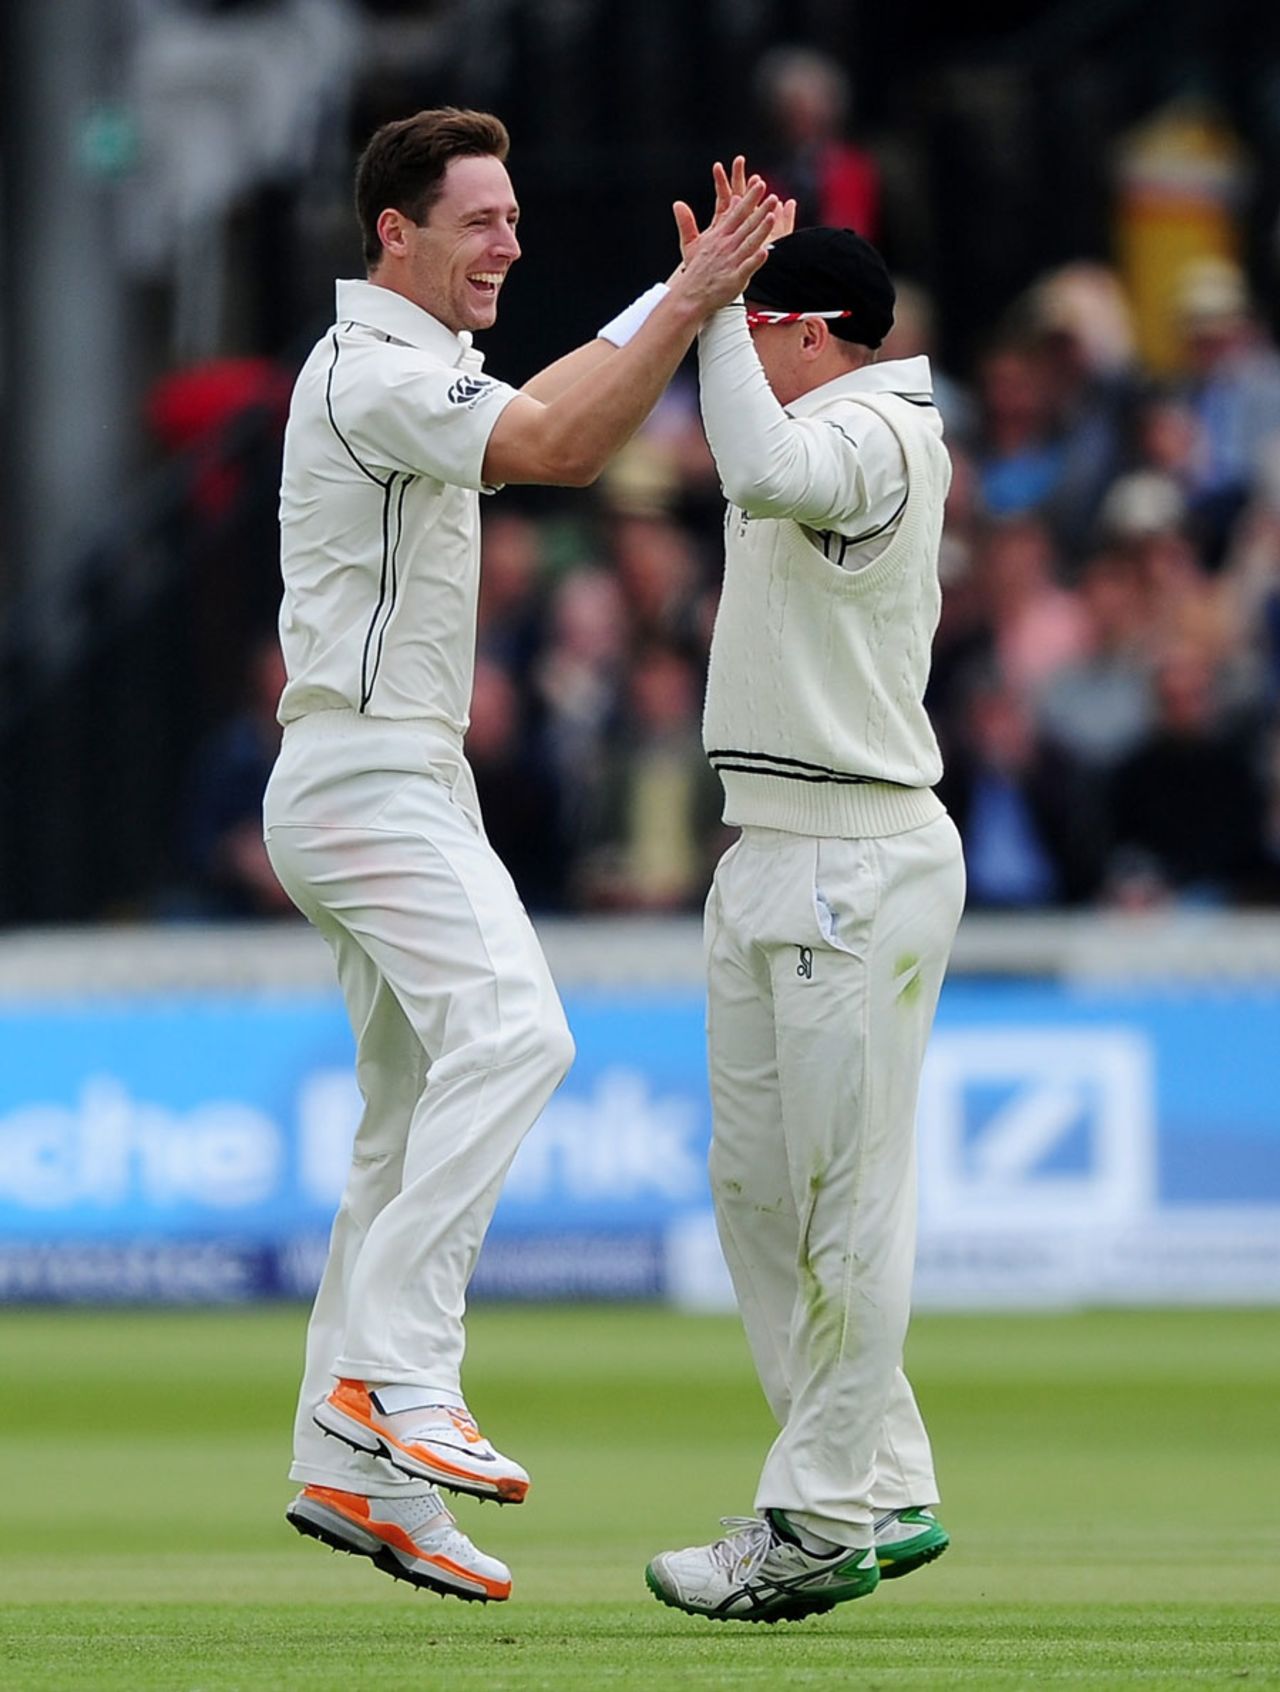 Matt Henry produced a perfect delivery to remove Ian Bell, England v New Zealand, 1st Investec Test, Lord's, 1st day, May 21, 2015